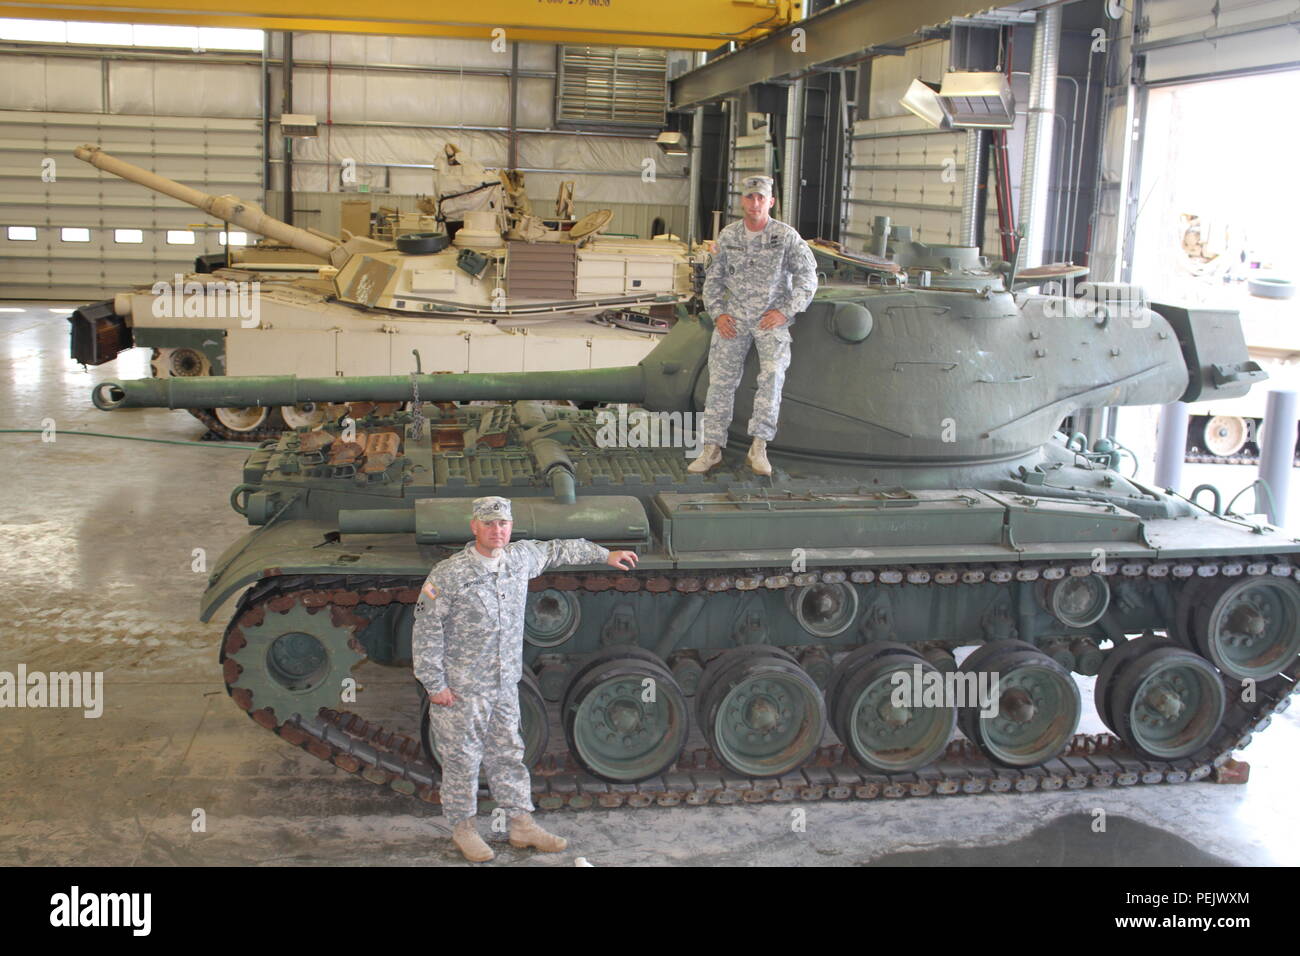 Sgt. 1st Class Clint Mitchell, left, and Sgt. 1st Class David Henderson, right, both Abrams tank system maintainers with the 3rd Battalion, 66th Armor Regiment, 1st Armored Brigade Combat Team, 1st Infantry Division, pose with two M47 Patton Tanks Aug. 26 at Fort Riley. The 'Black Knights' will display the tanks in front of the headquarters’ motor pool. Stock Photo